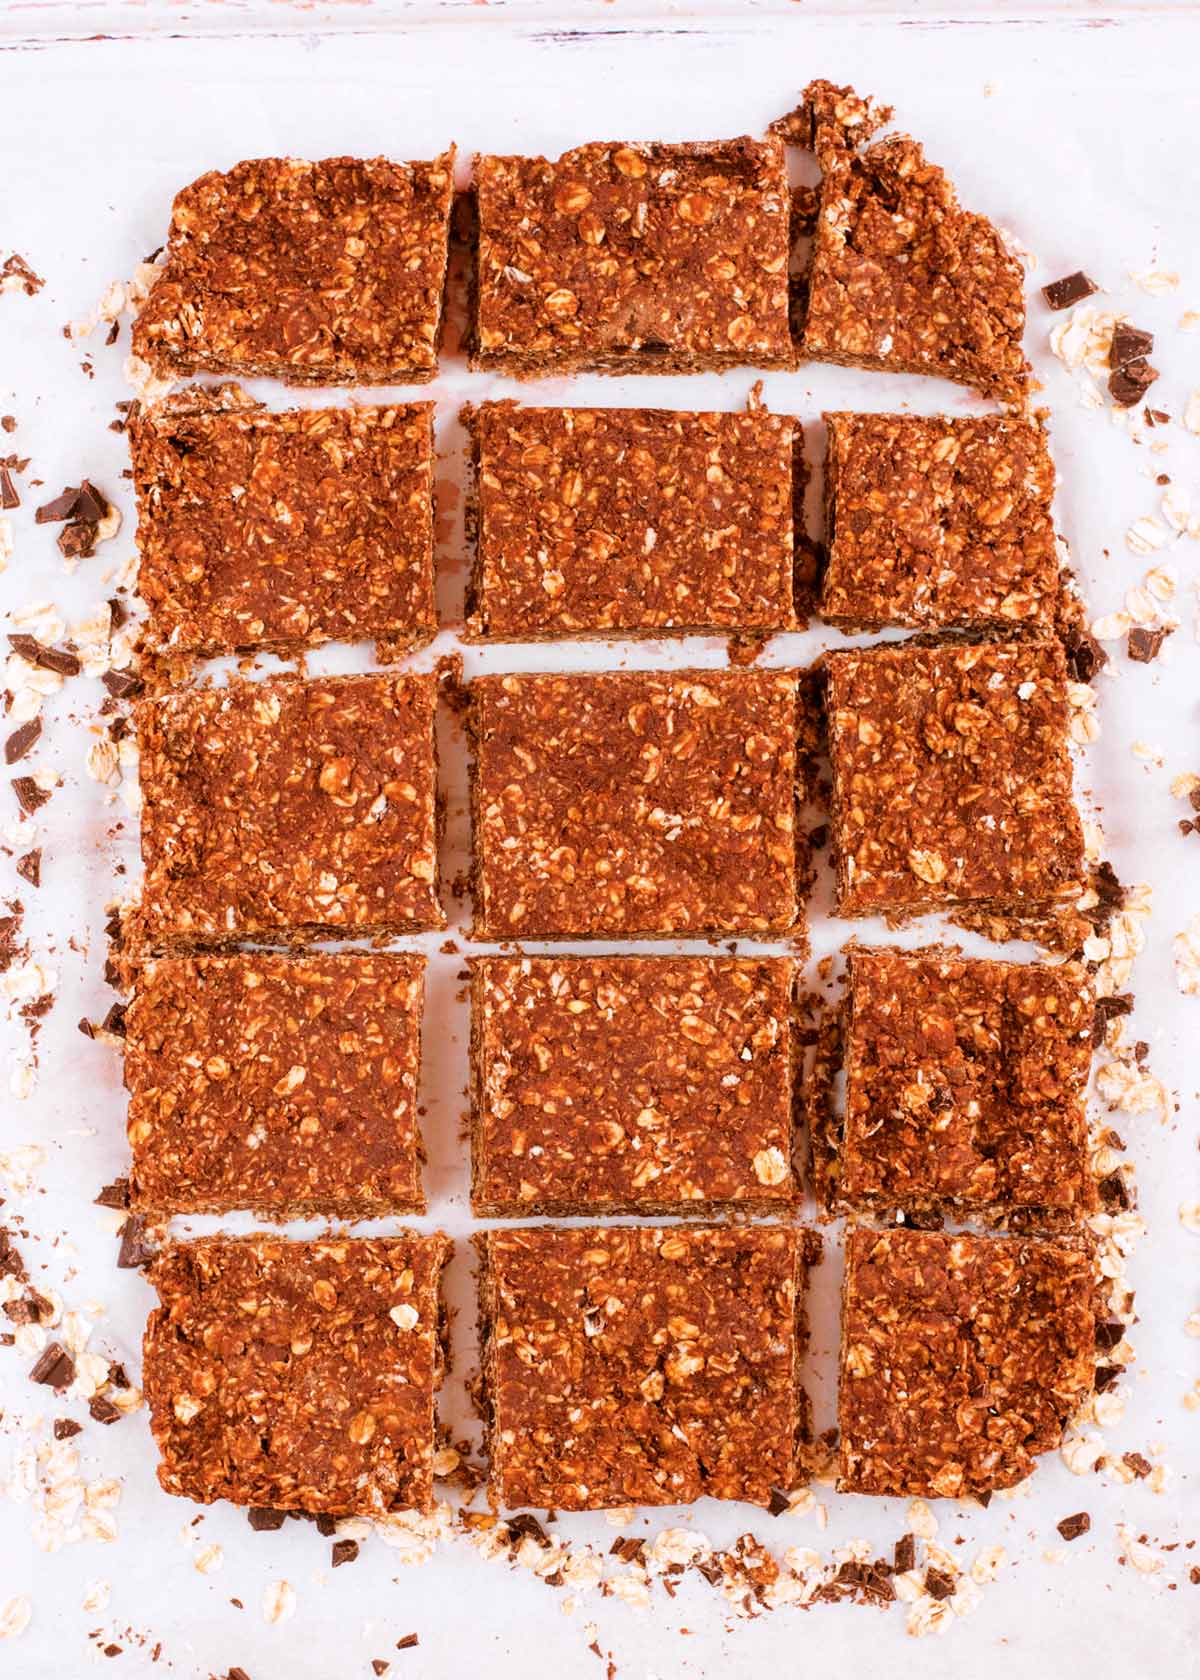 A slab of chocolate and peanut butter oats cut into squares.